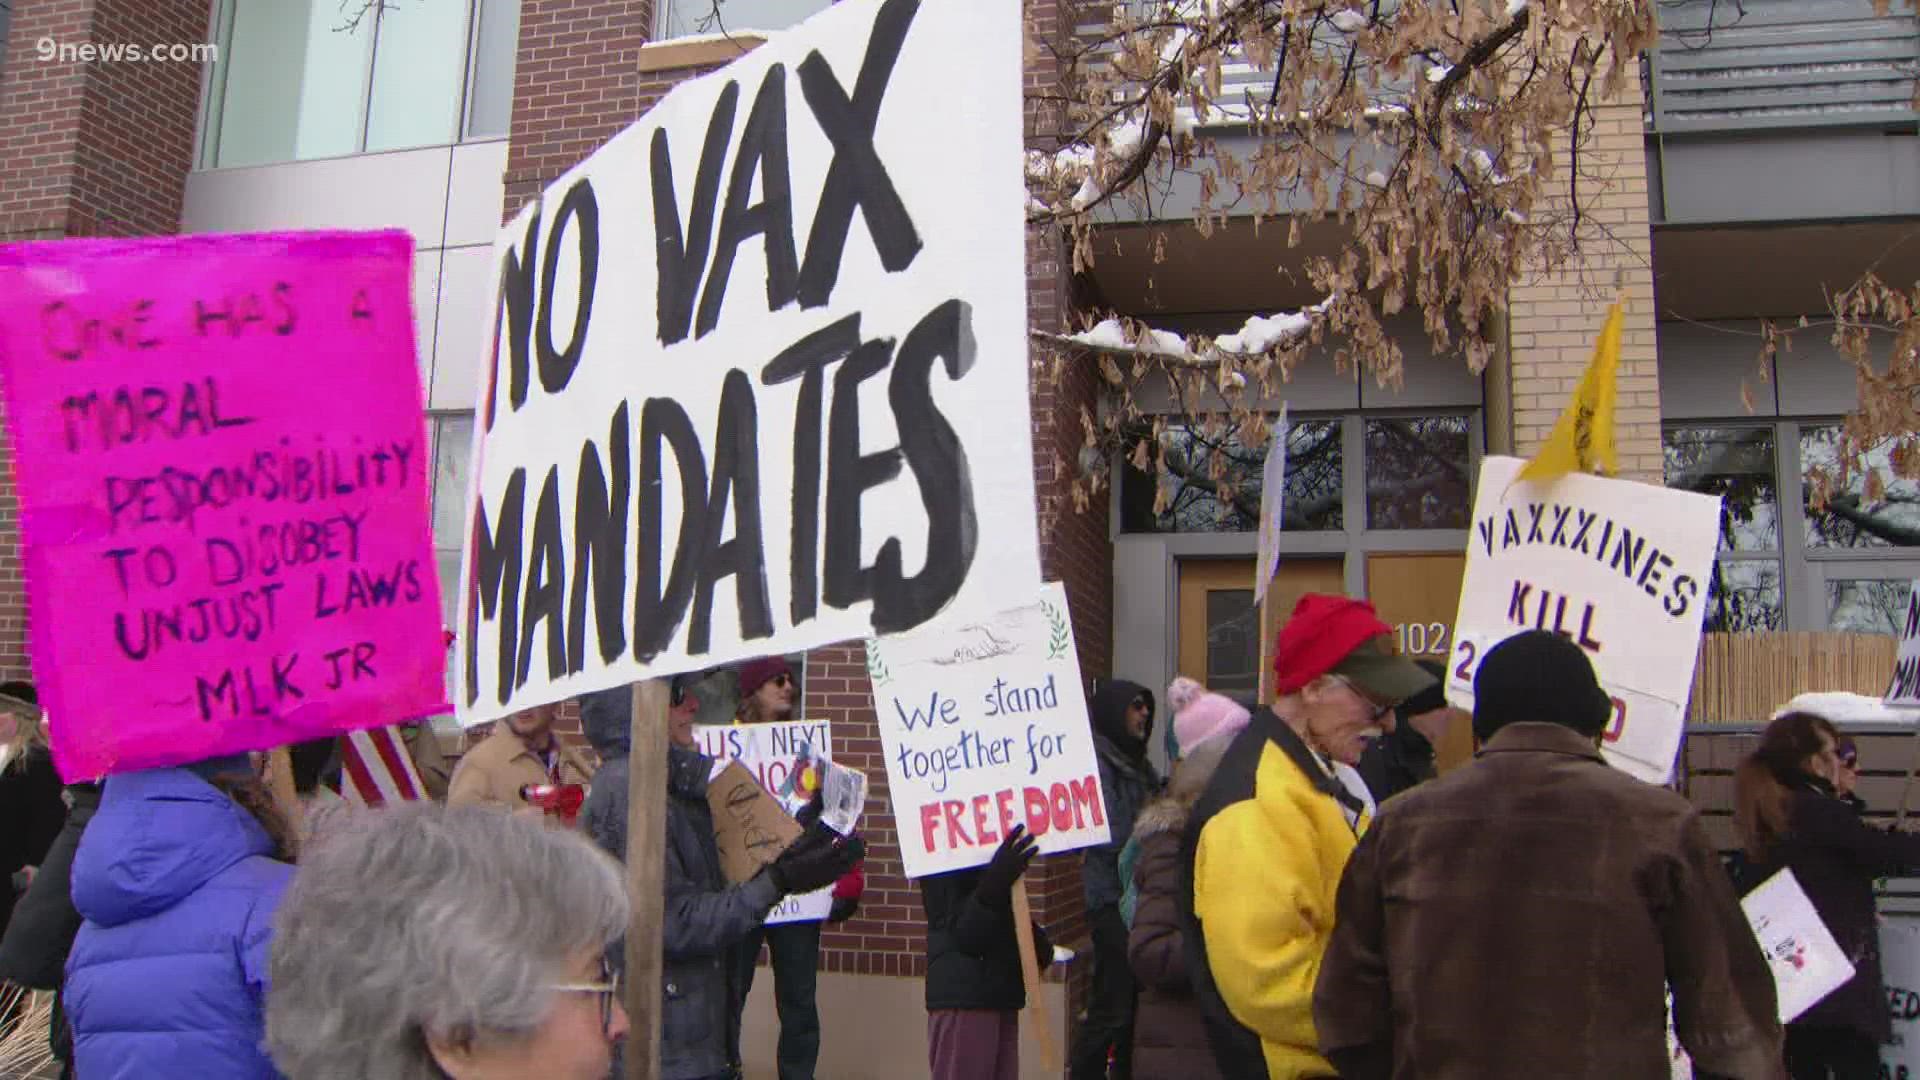 'No Vax Mandates Colorado' does not want vaccine mandates required in schools. That is not a mandate in the state. But they're protesting to keep it that way.